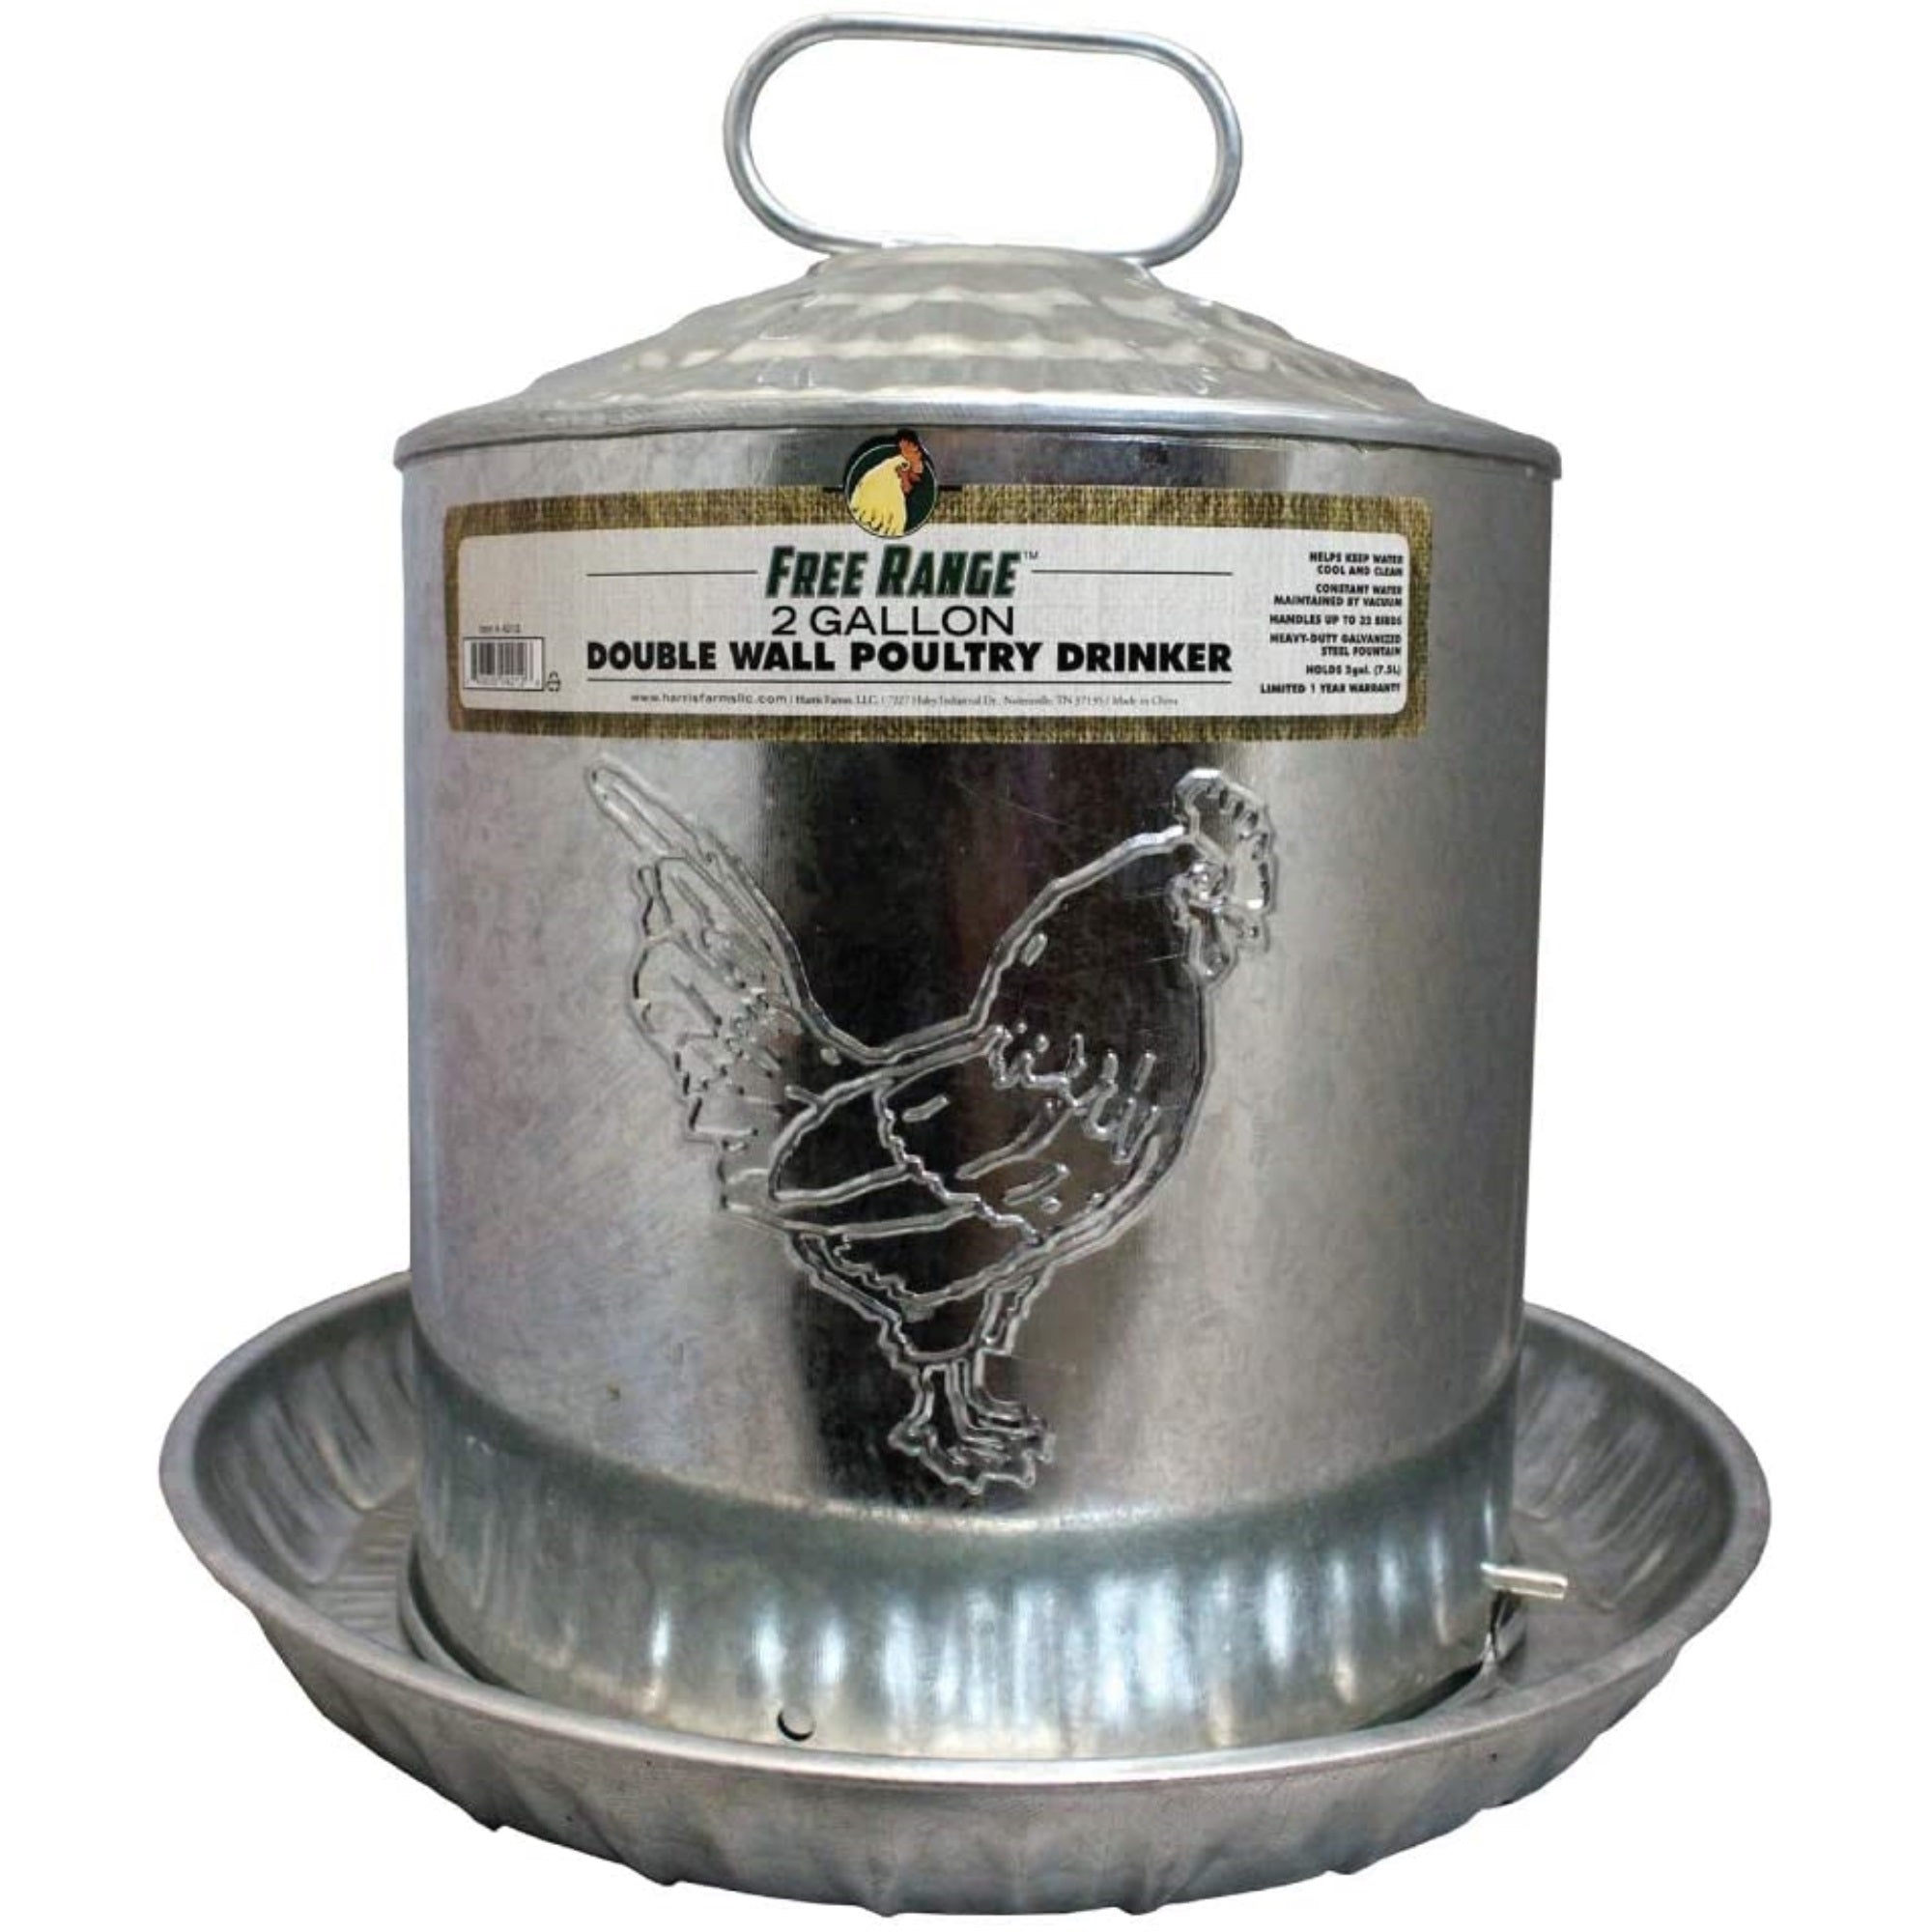 Harris Farms Galvanized Steel Double Wall Poultry Drinker, 2 gallons